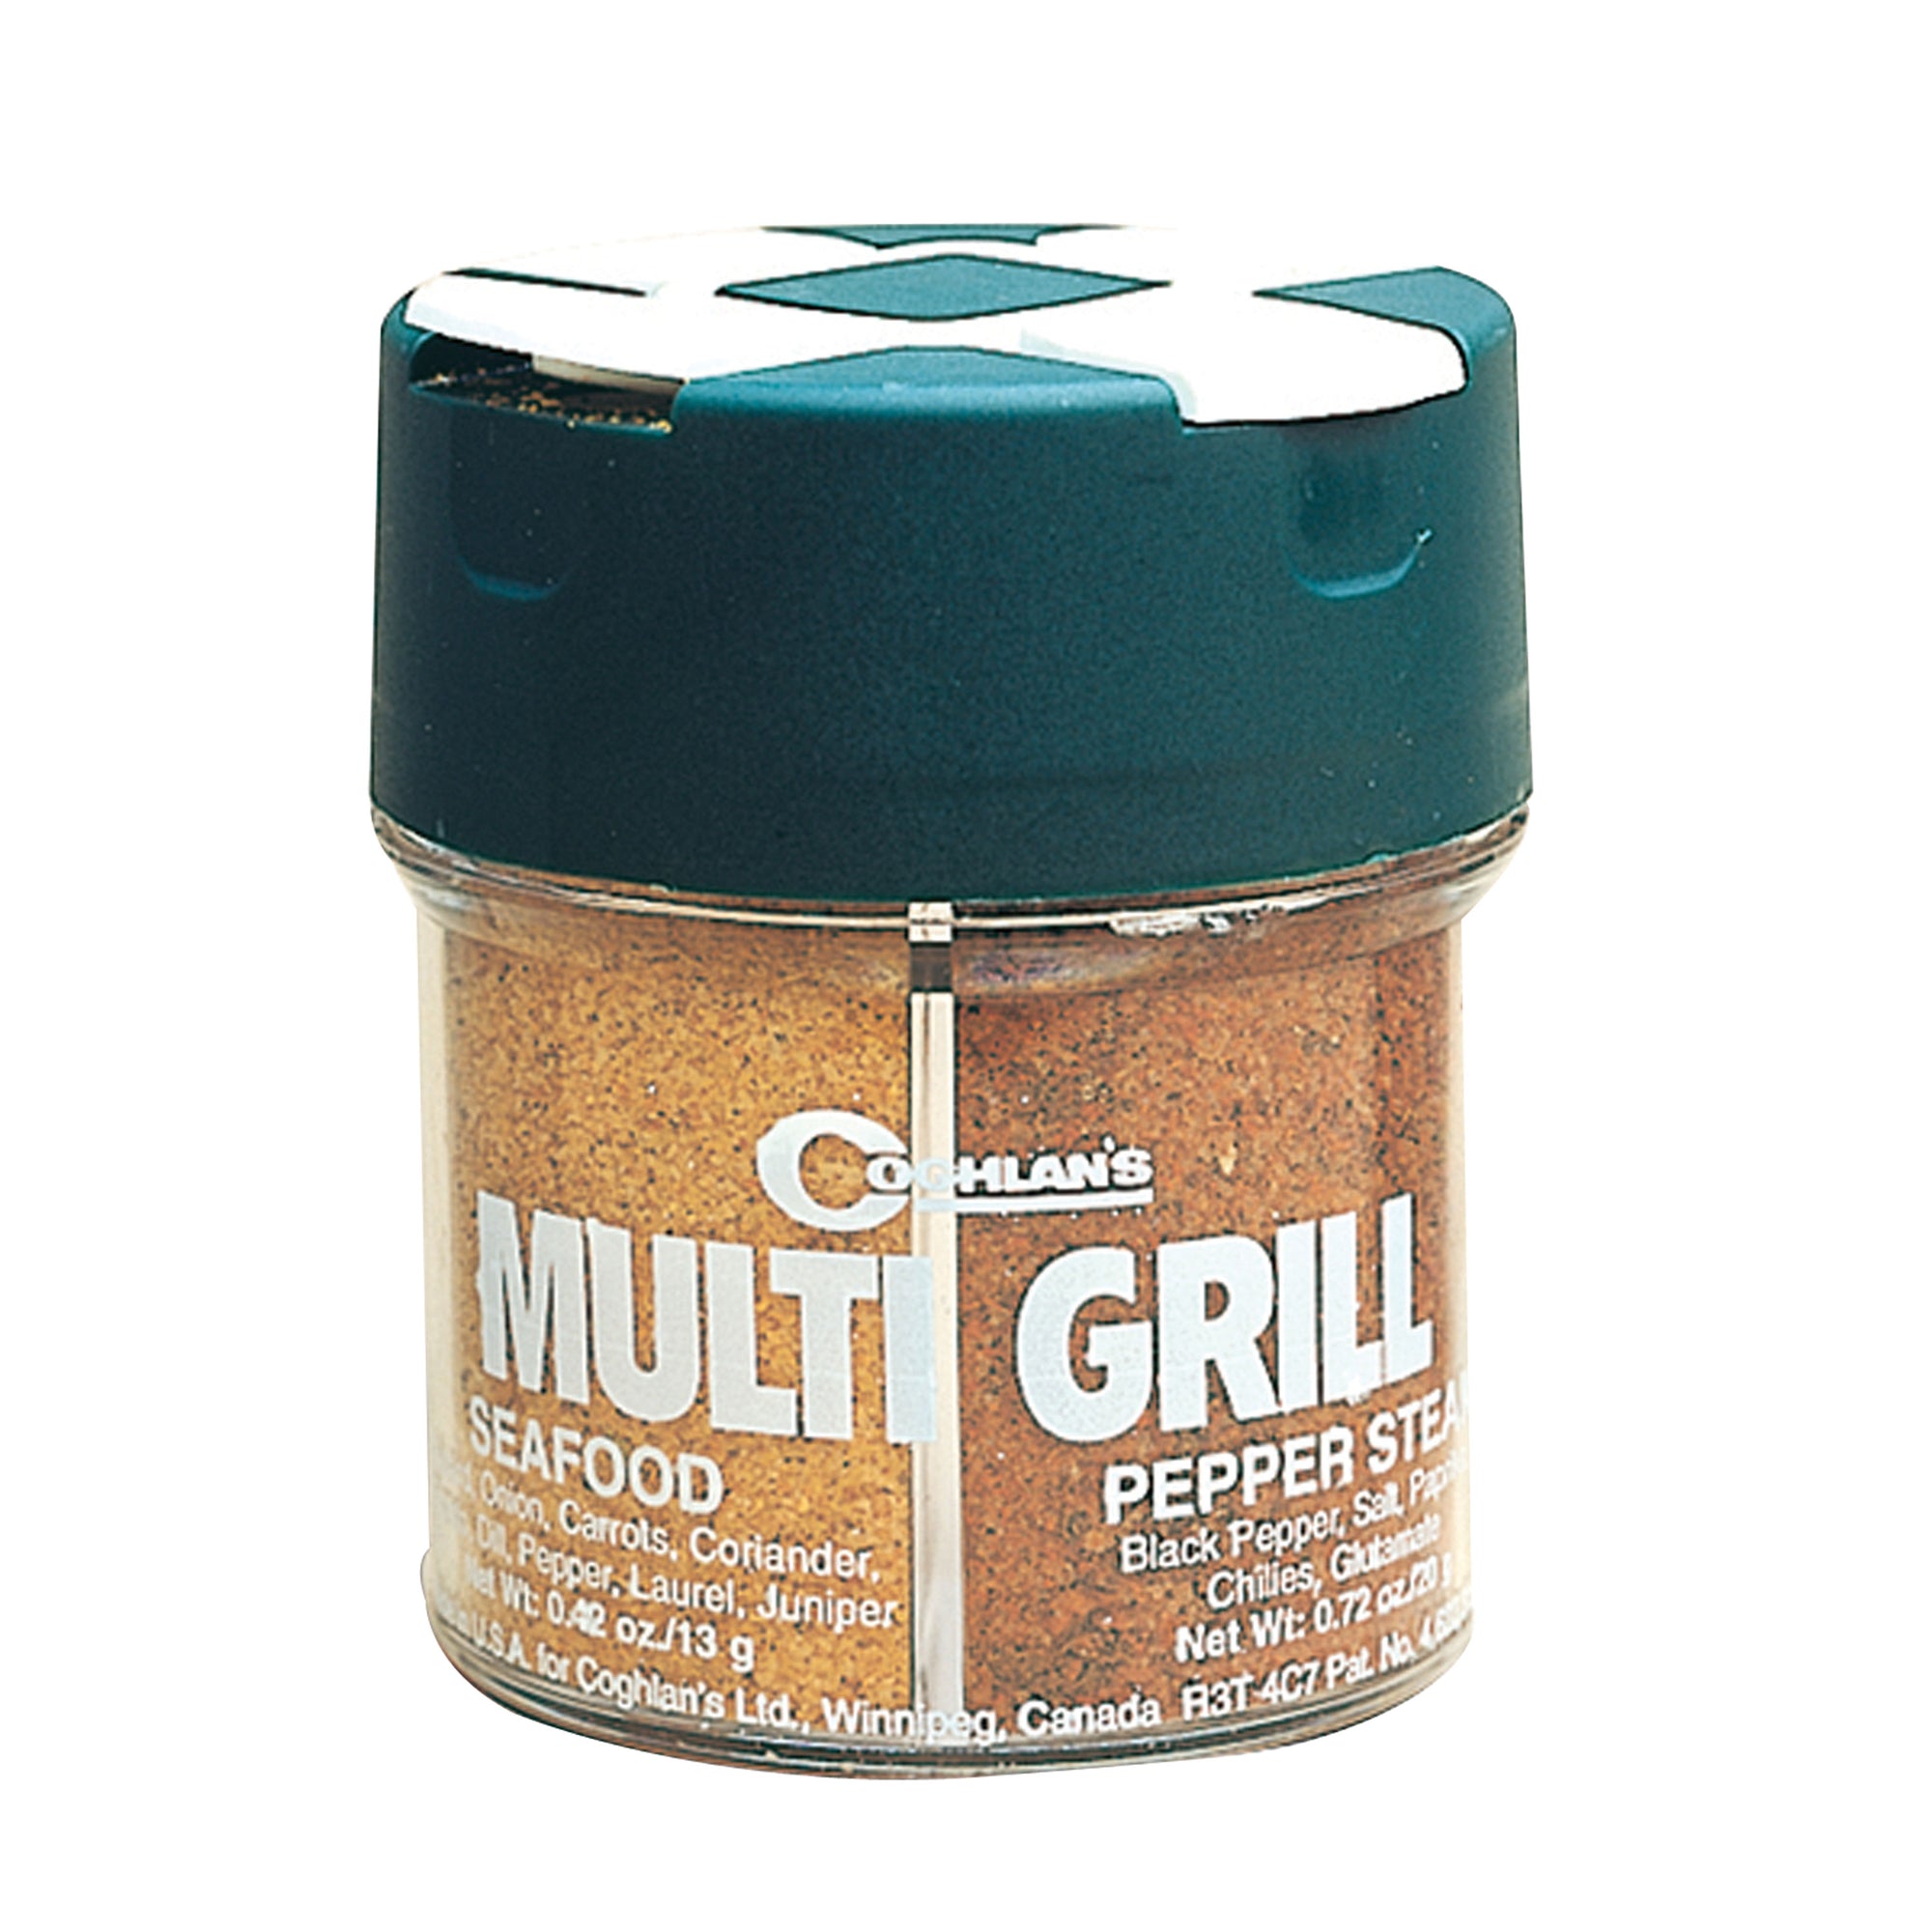 Coghlan's 0072 Multi-Grill Spice Pack - Four Herb Assortment